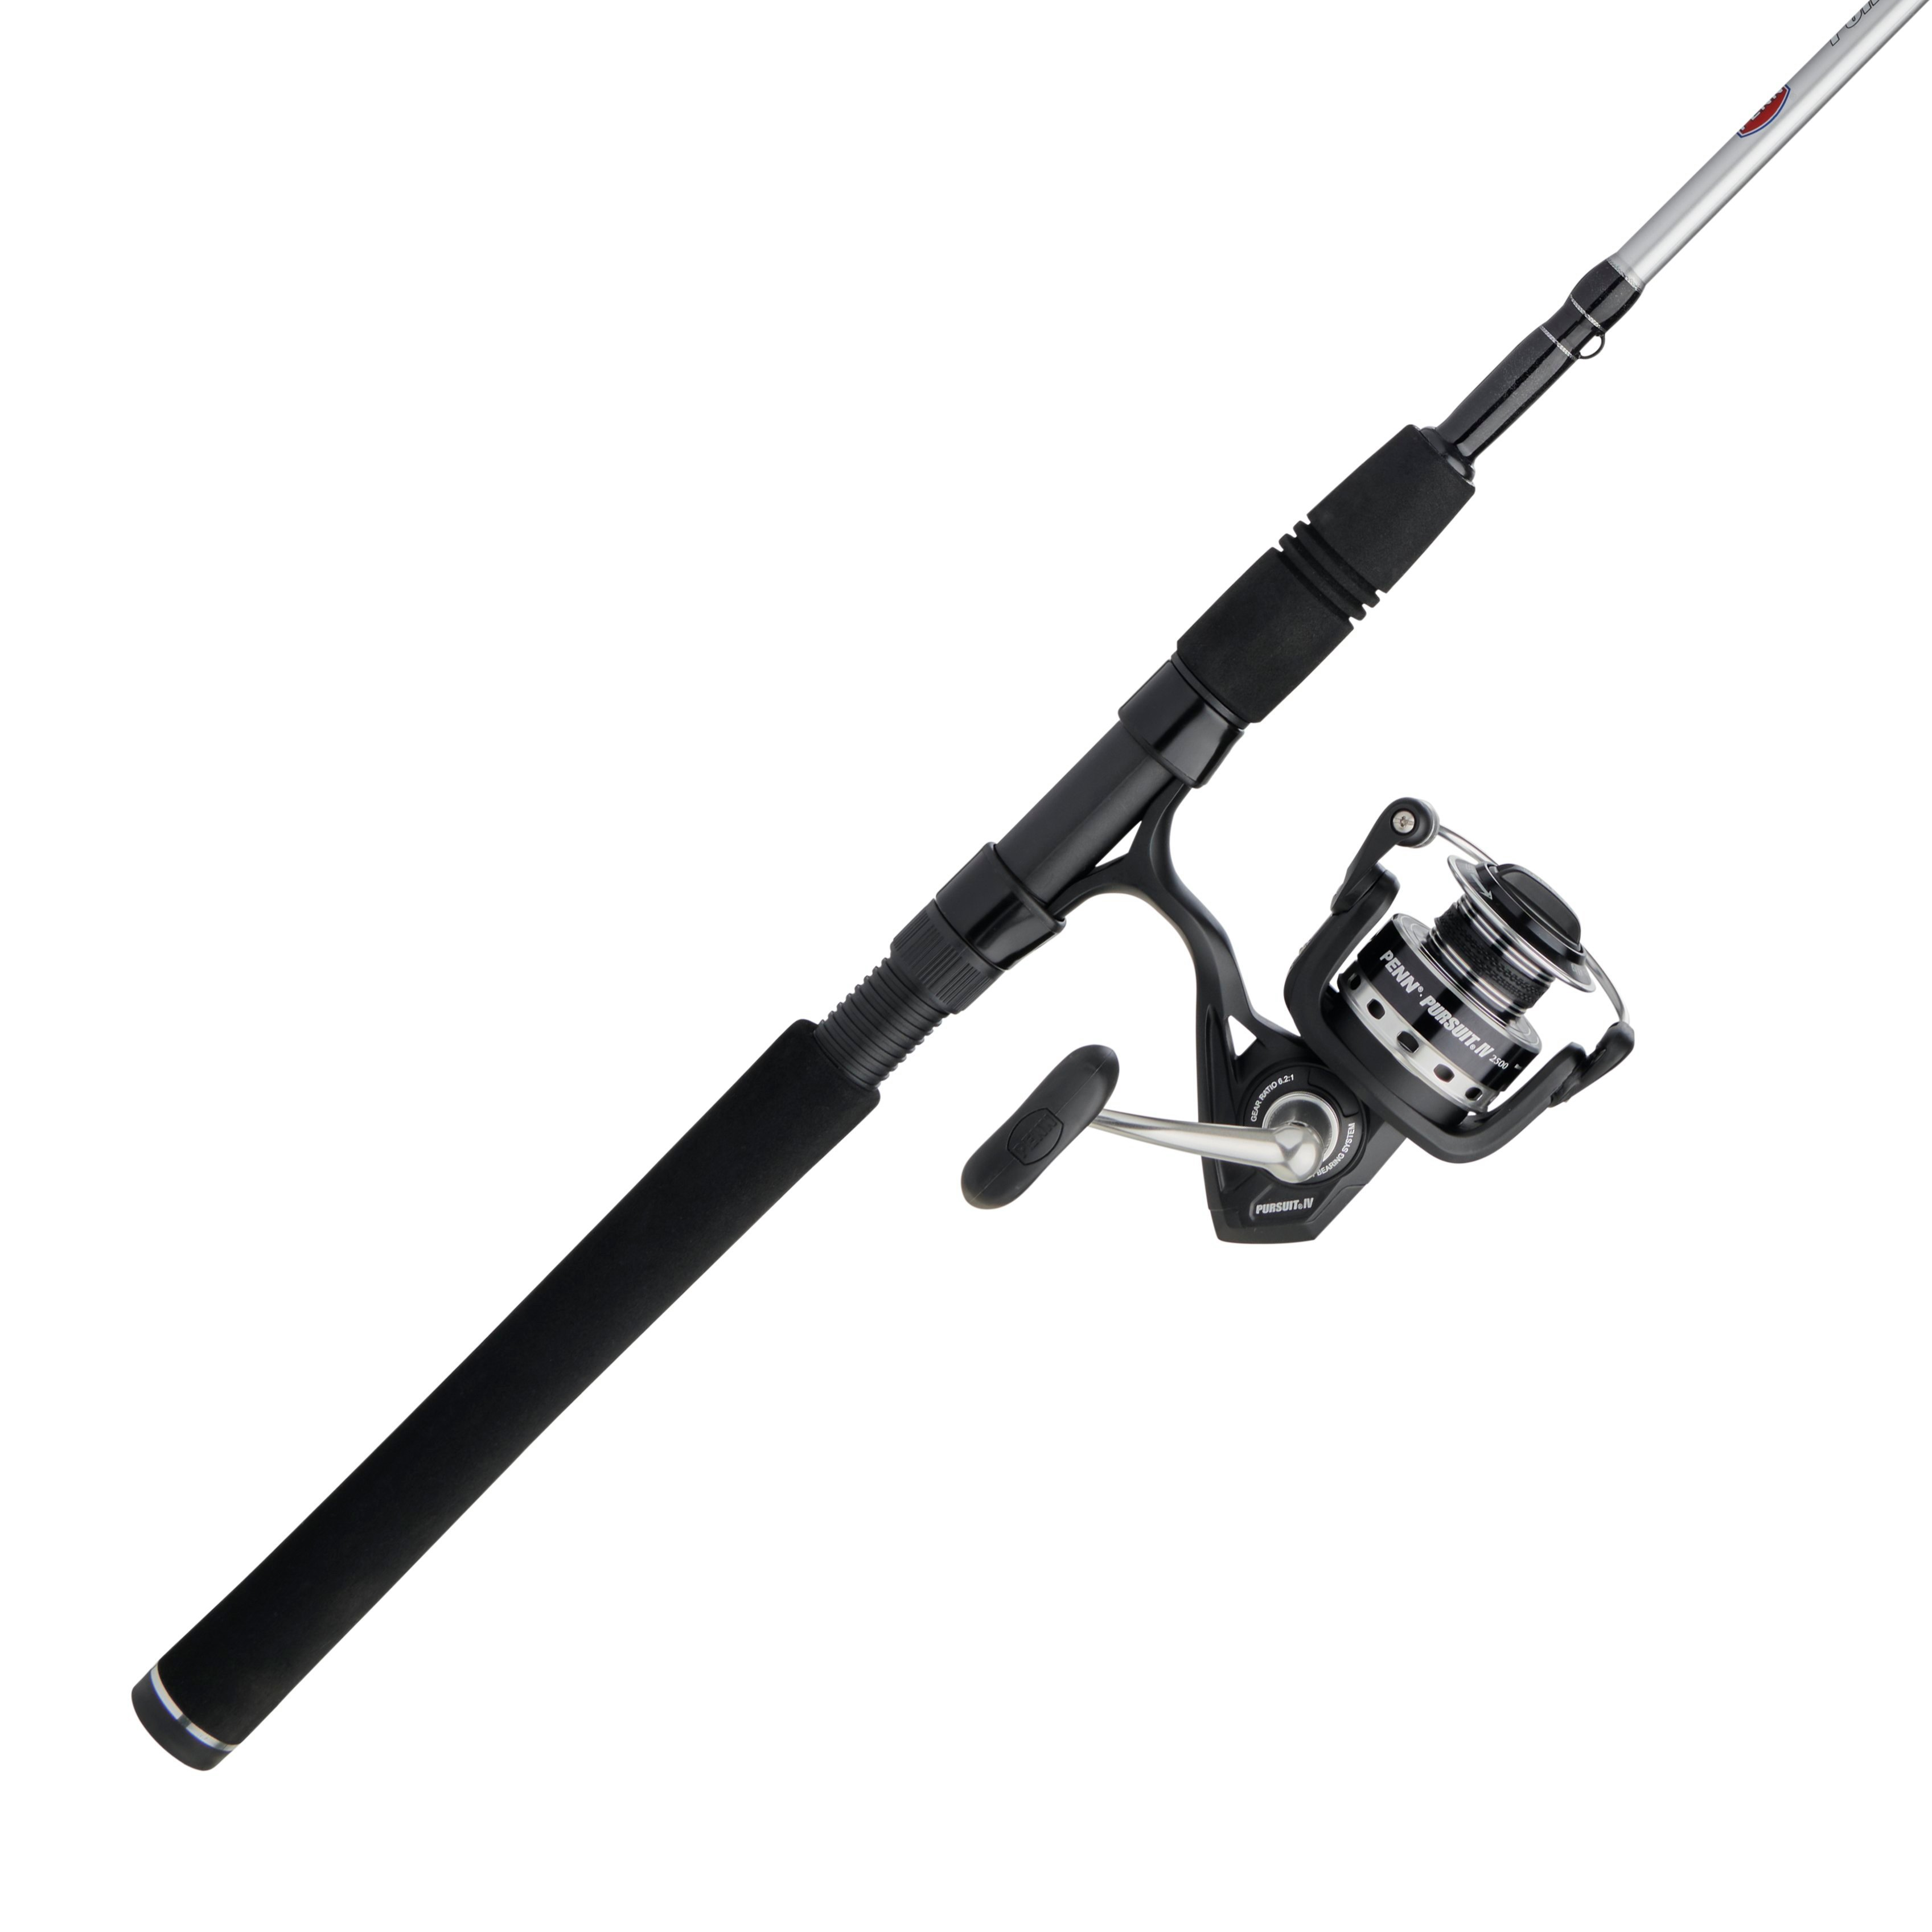 PENN 7' Pursuit IV Fishing Rod and Reel Inshore Spinning Combo - image 1 of 6